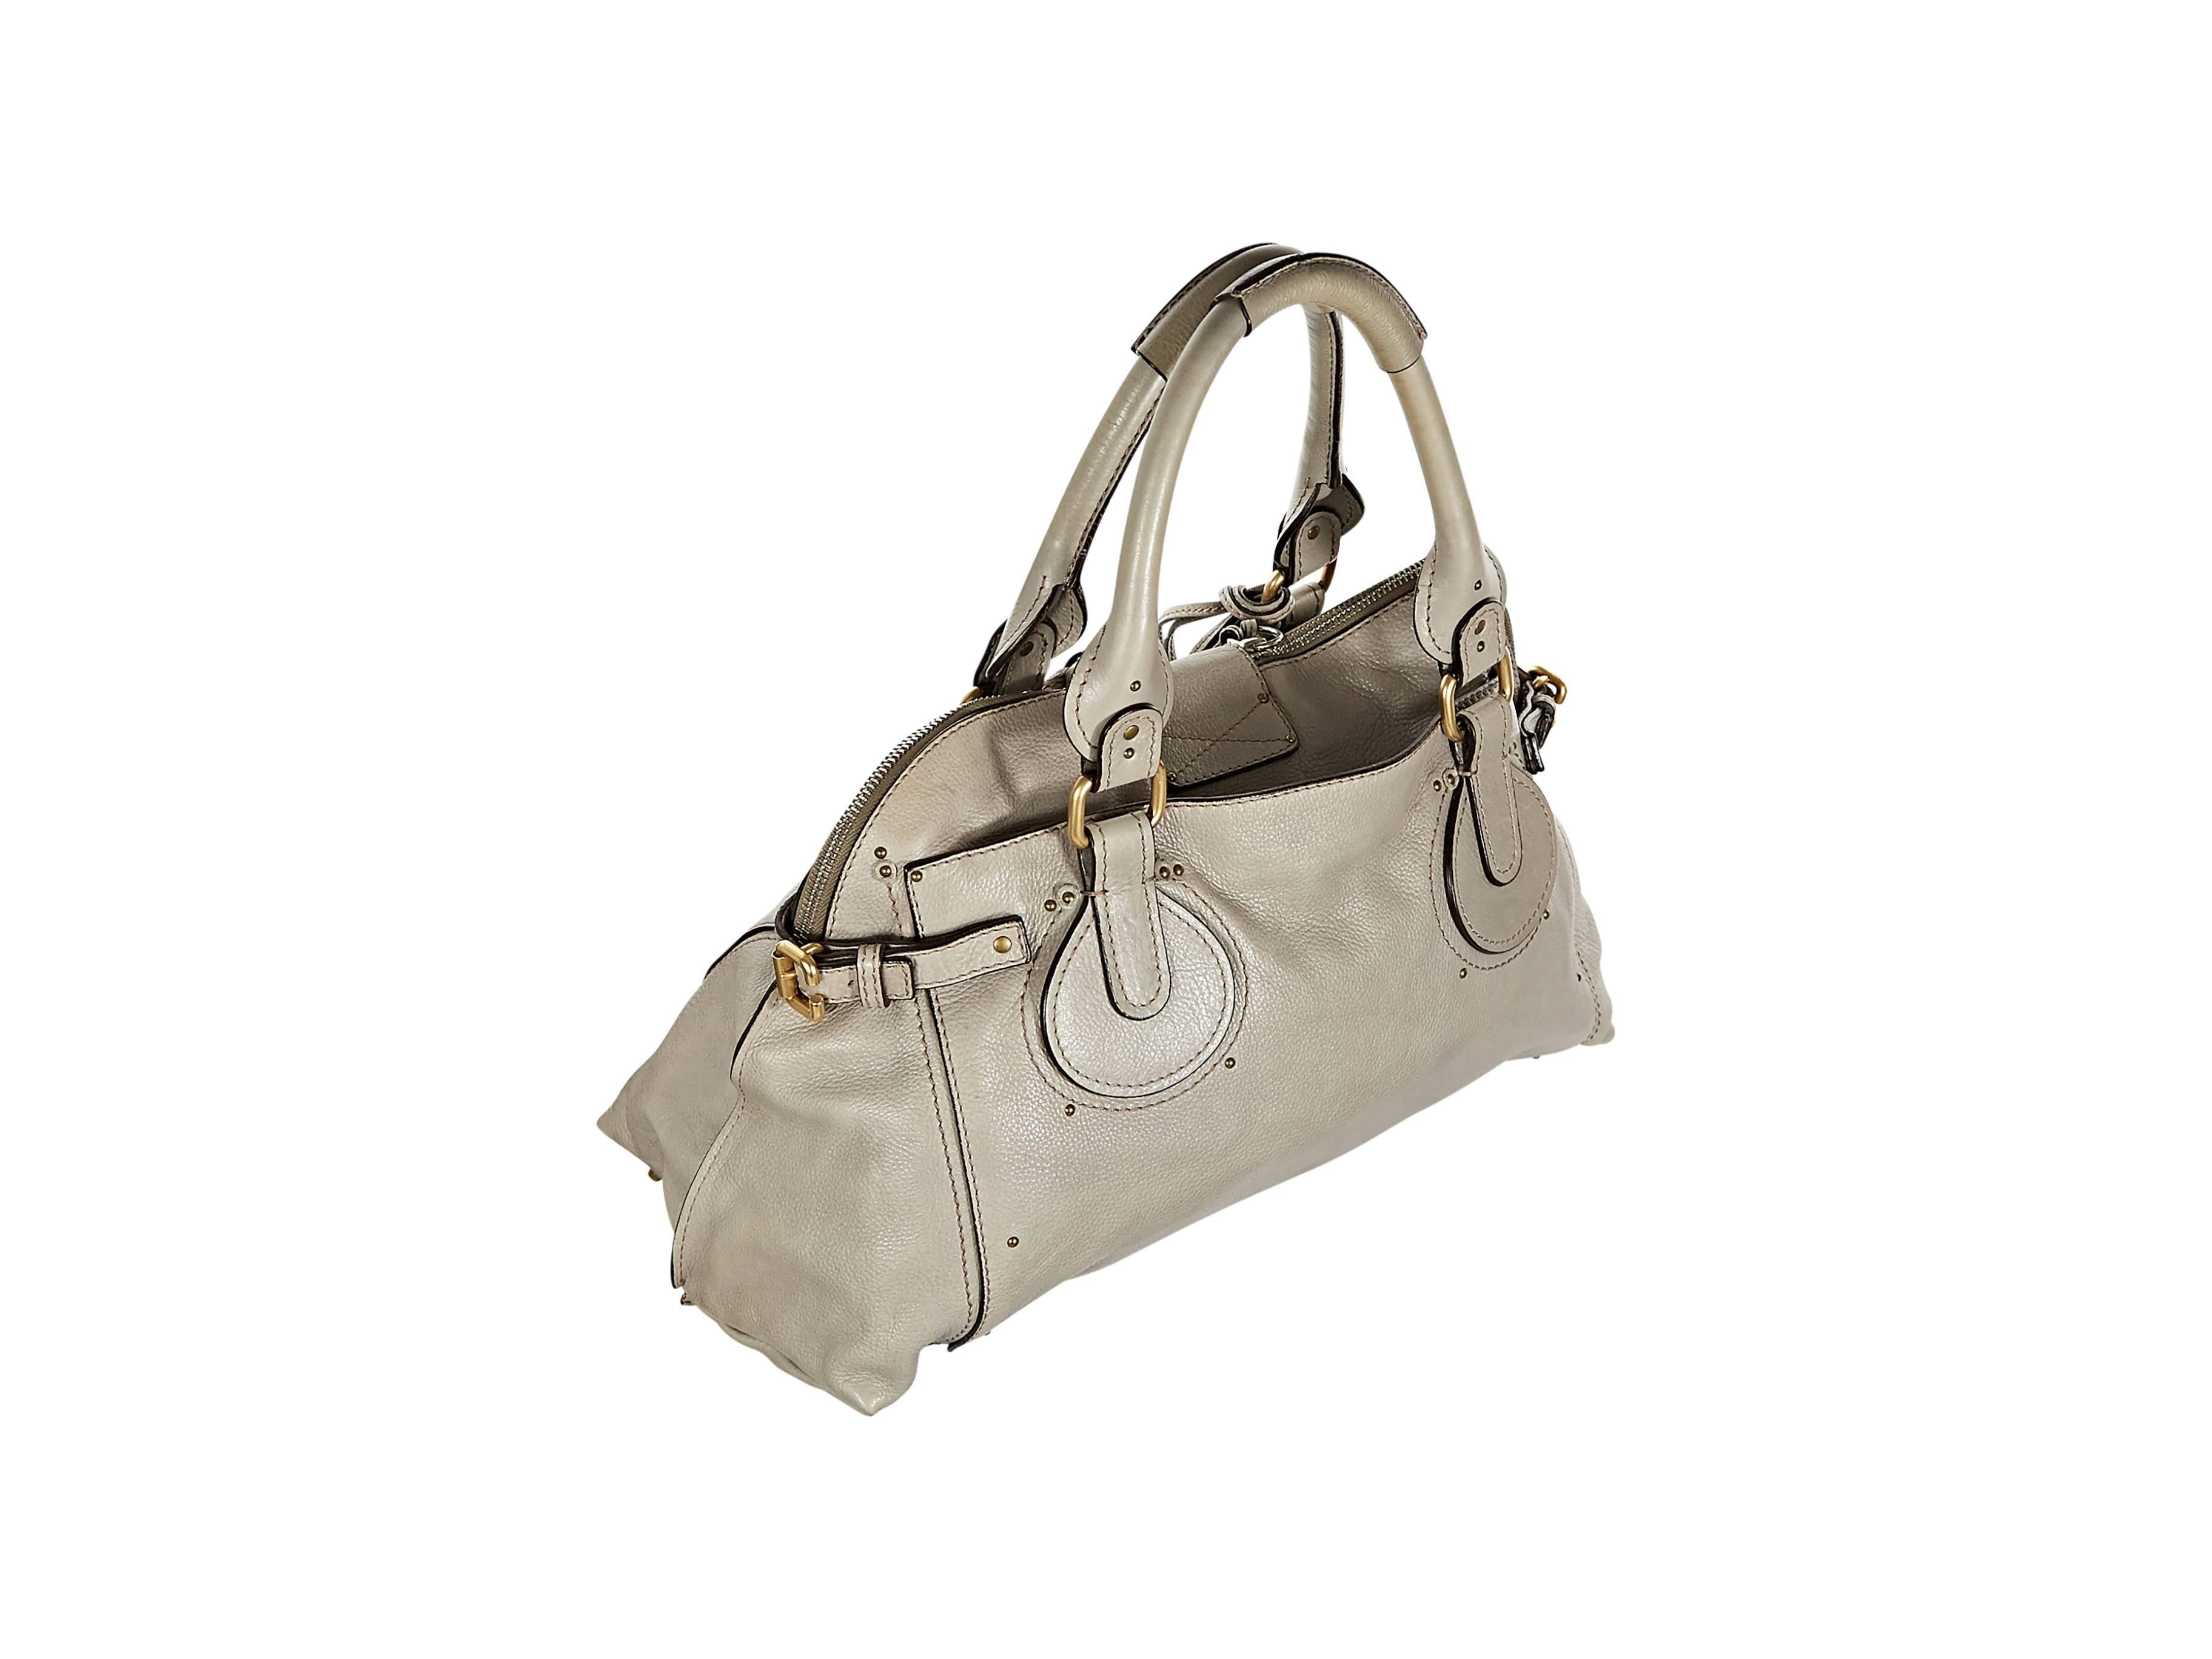 Taupe leather Paddington tote bag by Chloe.  Studded details.  Dual carry handles.  Lock and key closure on zip-close front flap.  Side buckle accents.  Back exterior slide pocket.  Protective metal feet.  Goldtone hardware.